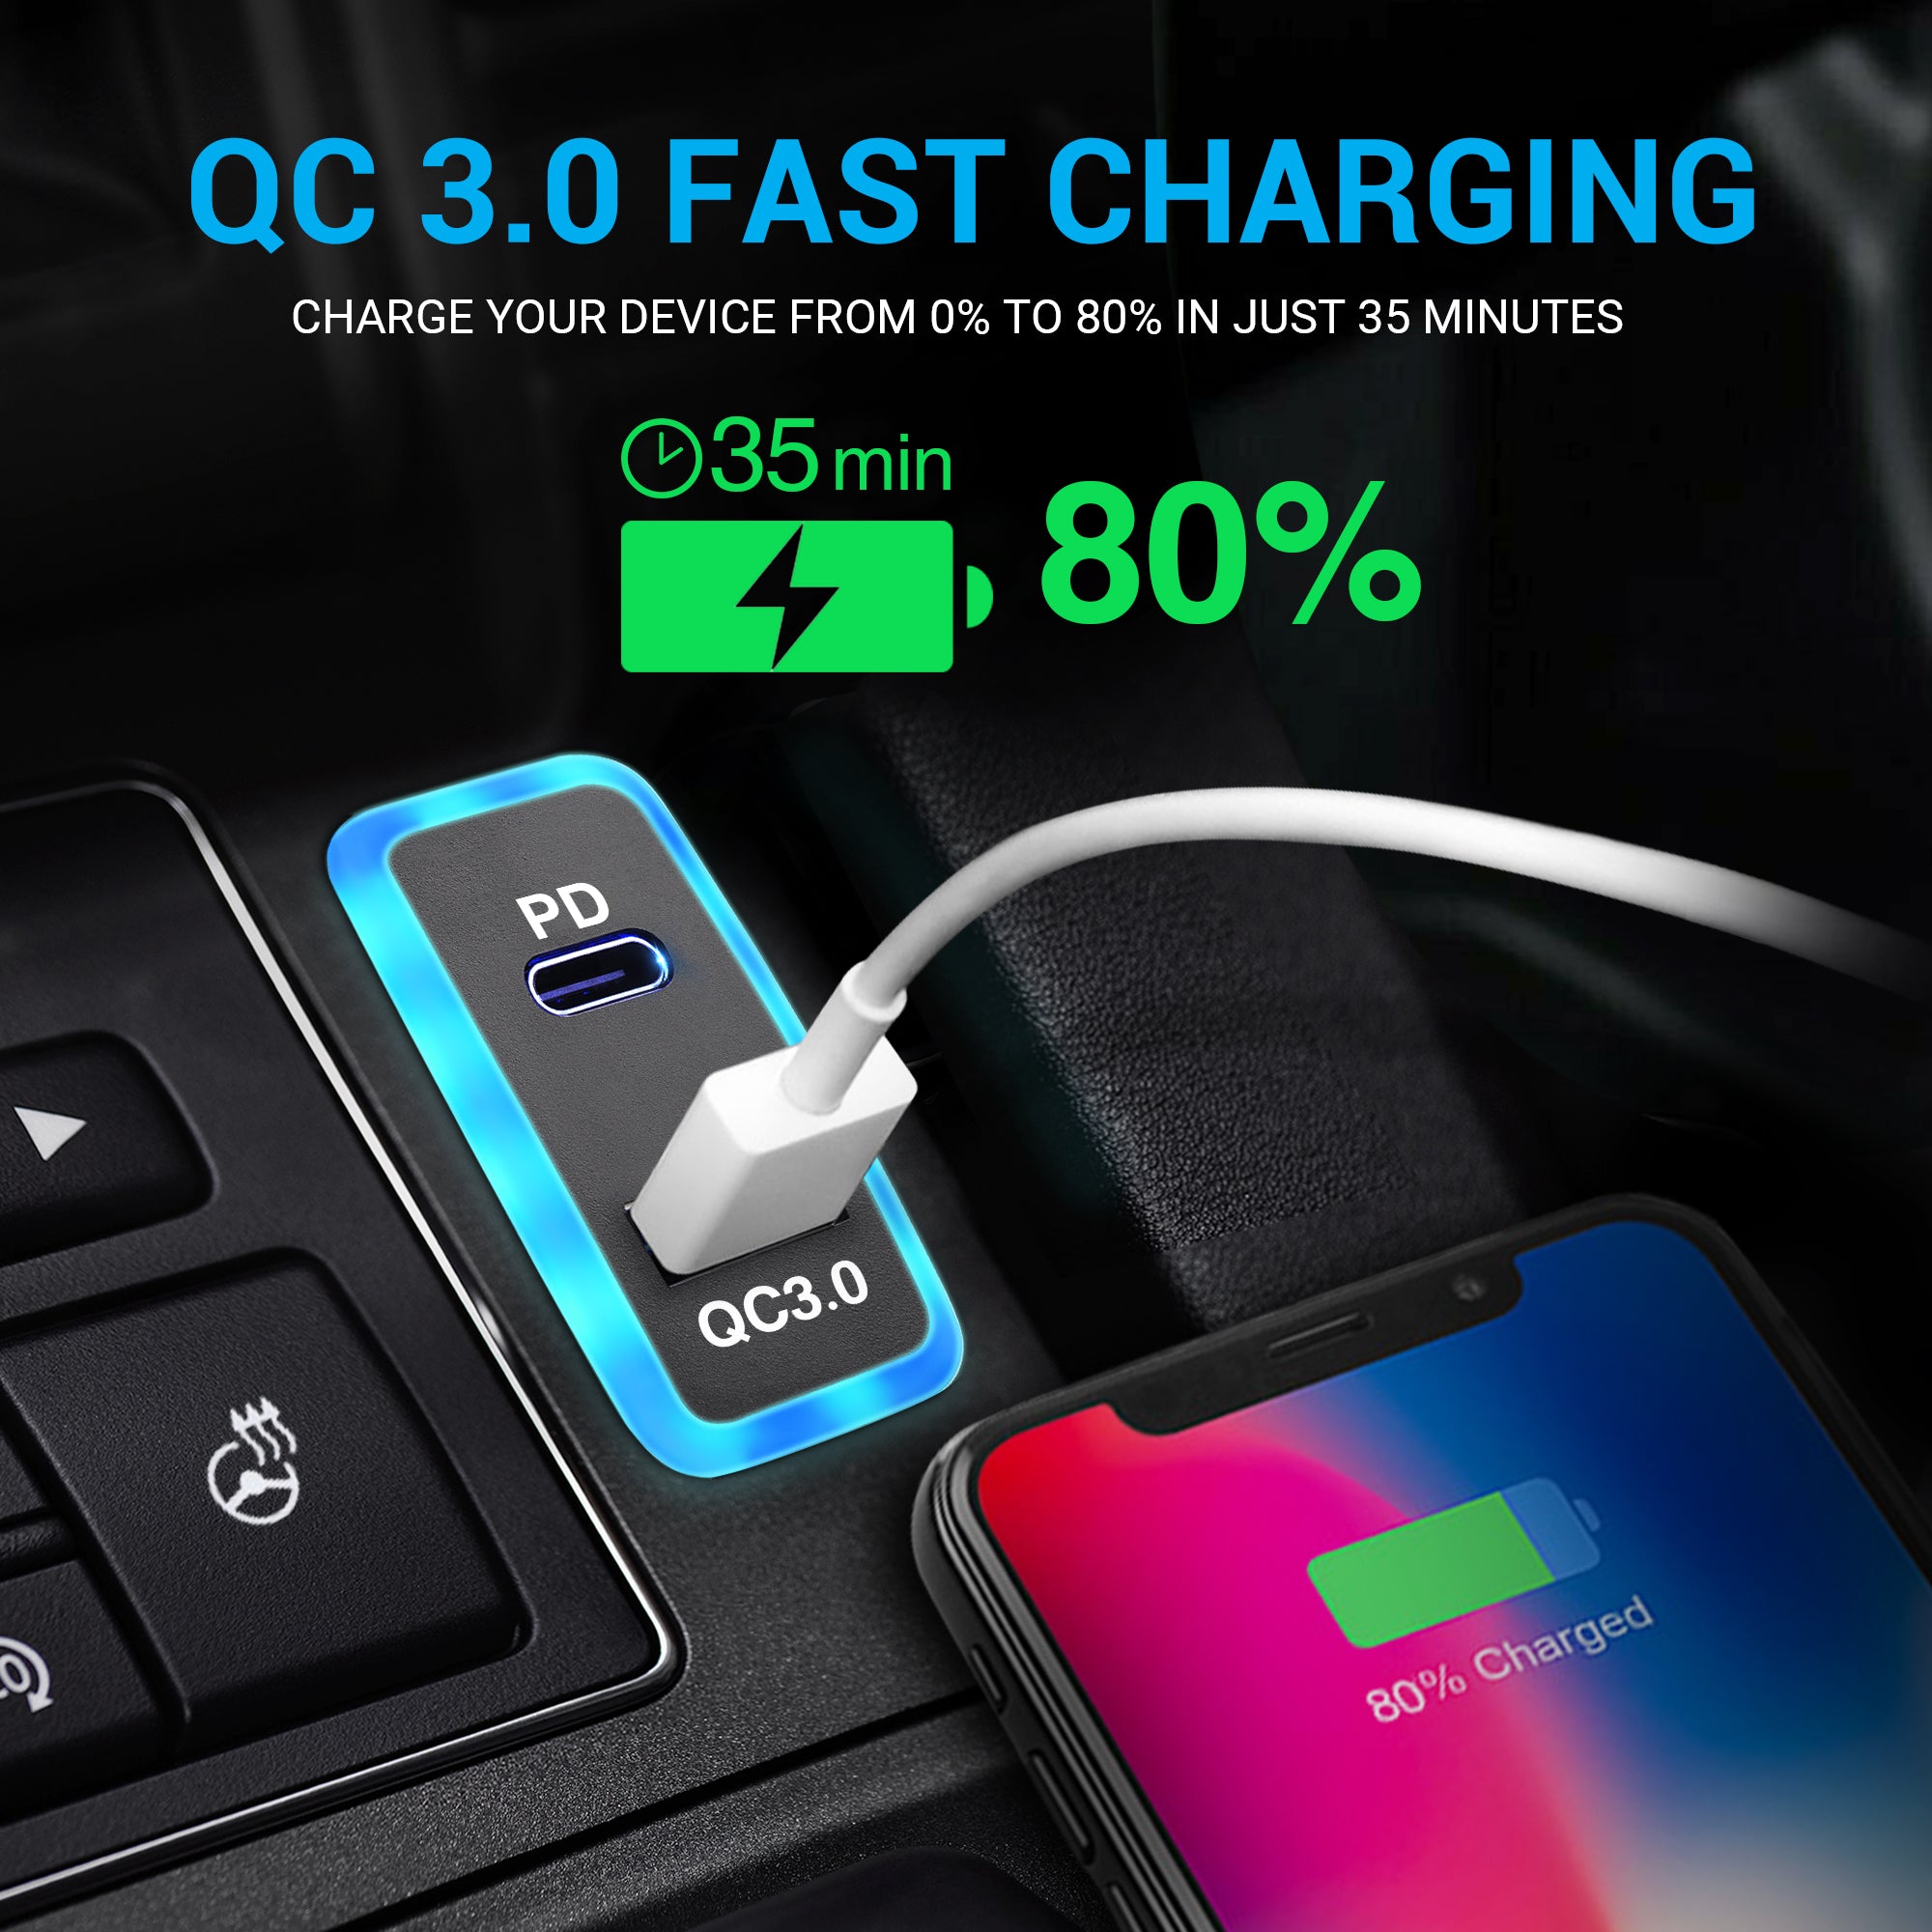 MICTUNING 12V/24V USB C Car Charger for Toyota, Dual USB Ports Qc3.0 & PD Type C Car Power Socket, Large Size: 44x 22mm (1.6 x 0.9)